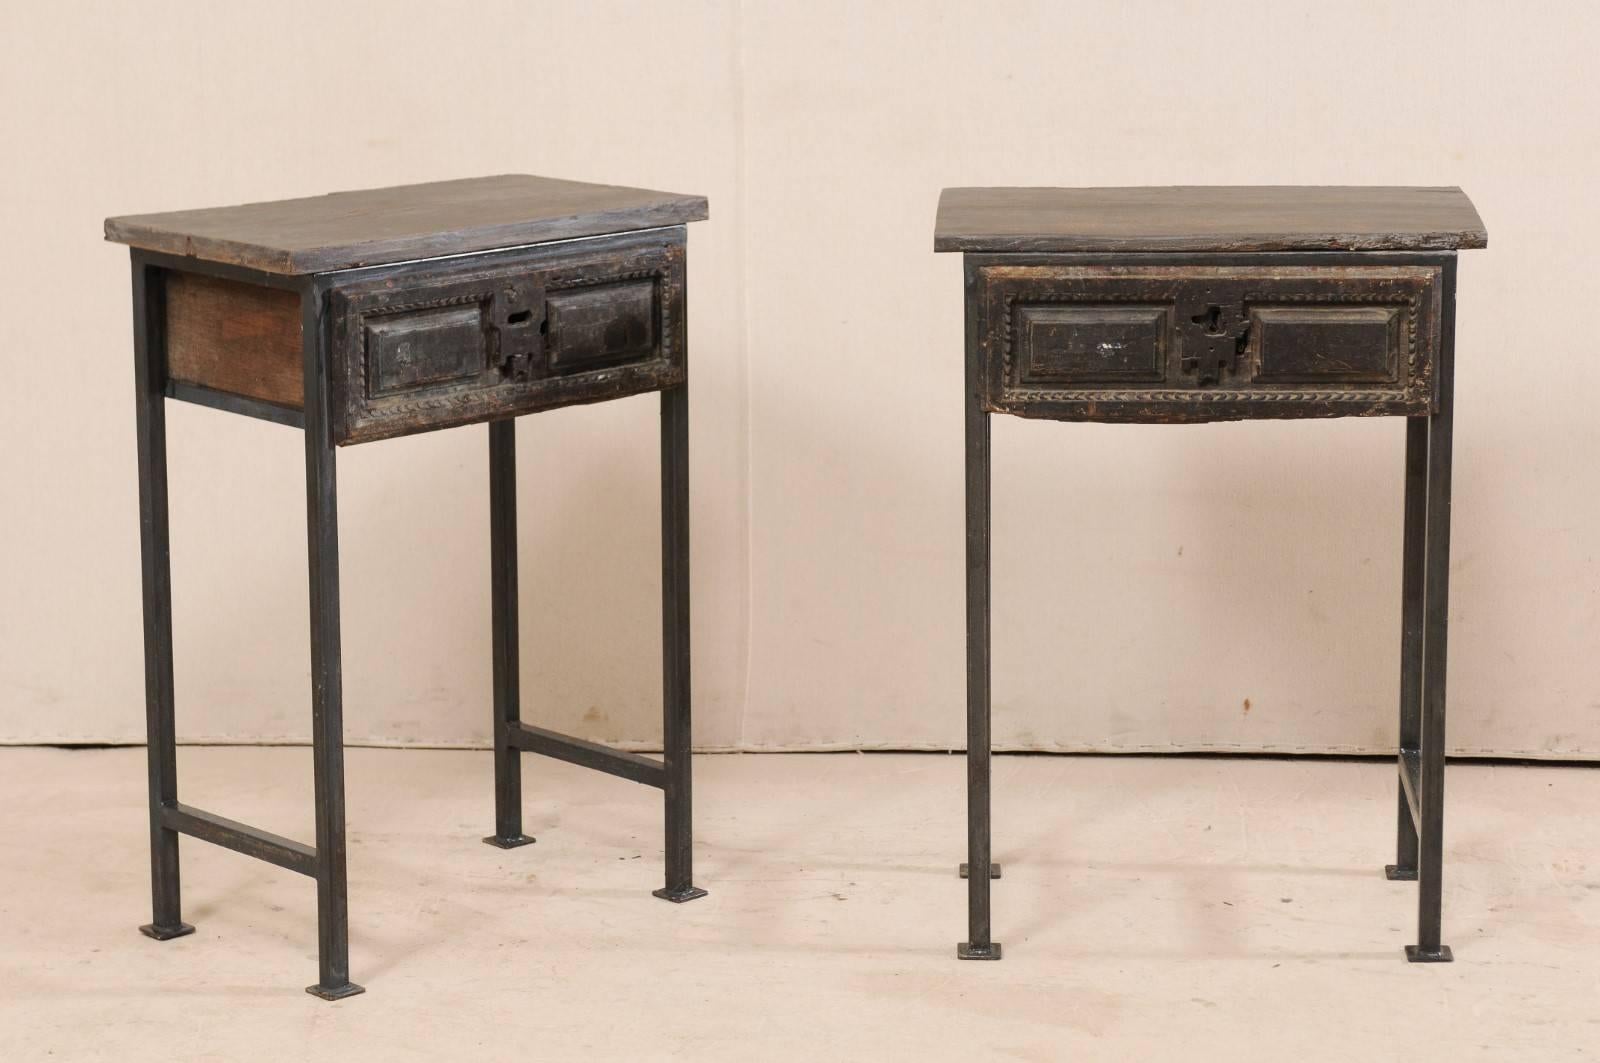 A pair of unique 18th century Spanish single drawer tables. This pair of 18th century (or earlier) Spanish drawers have been re-imagined and set into a custom iron base and older wood tops to produce this fantastic pair of statement pieces. The